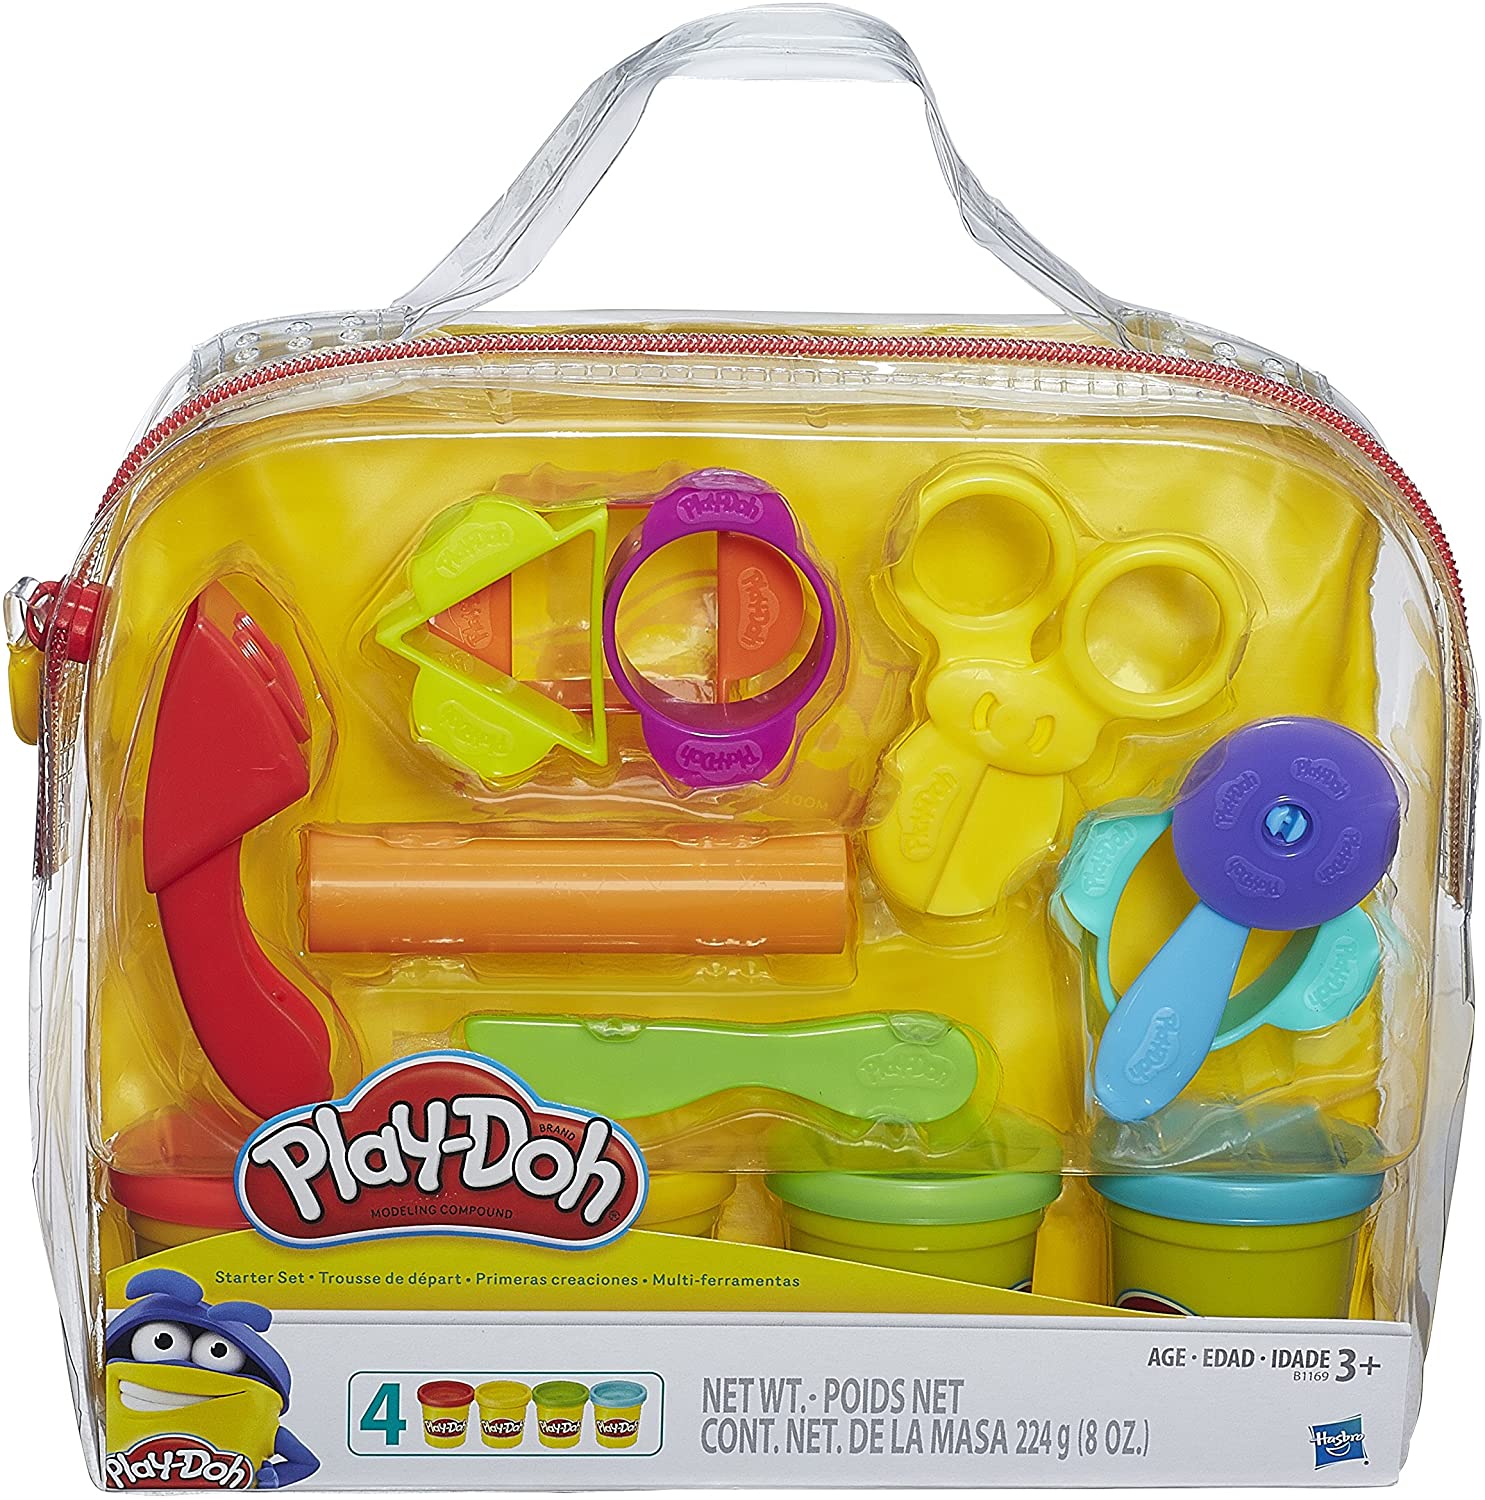 Play-Doh Starter Set Plastic Tools & 4 Cans of Playdoh